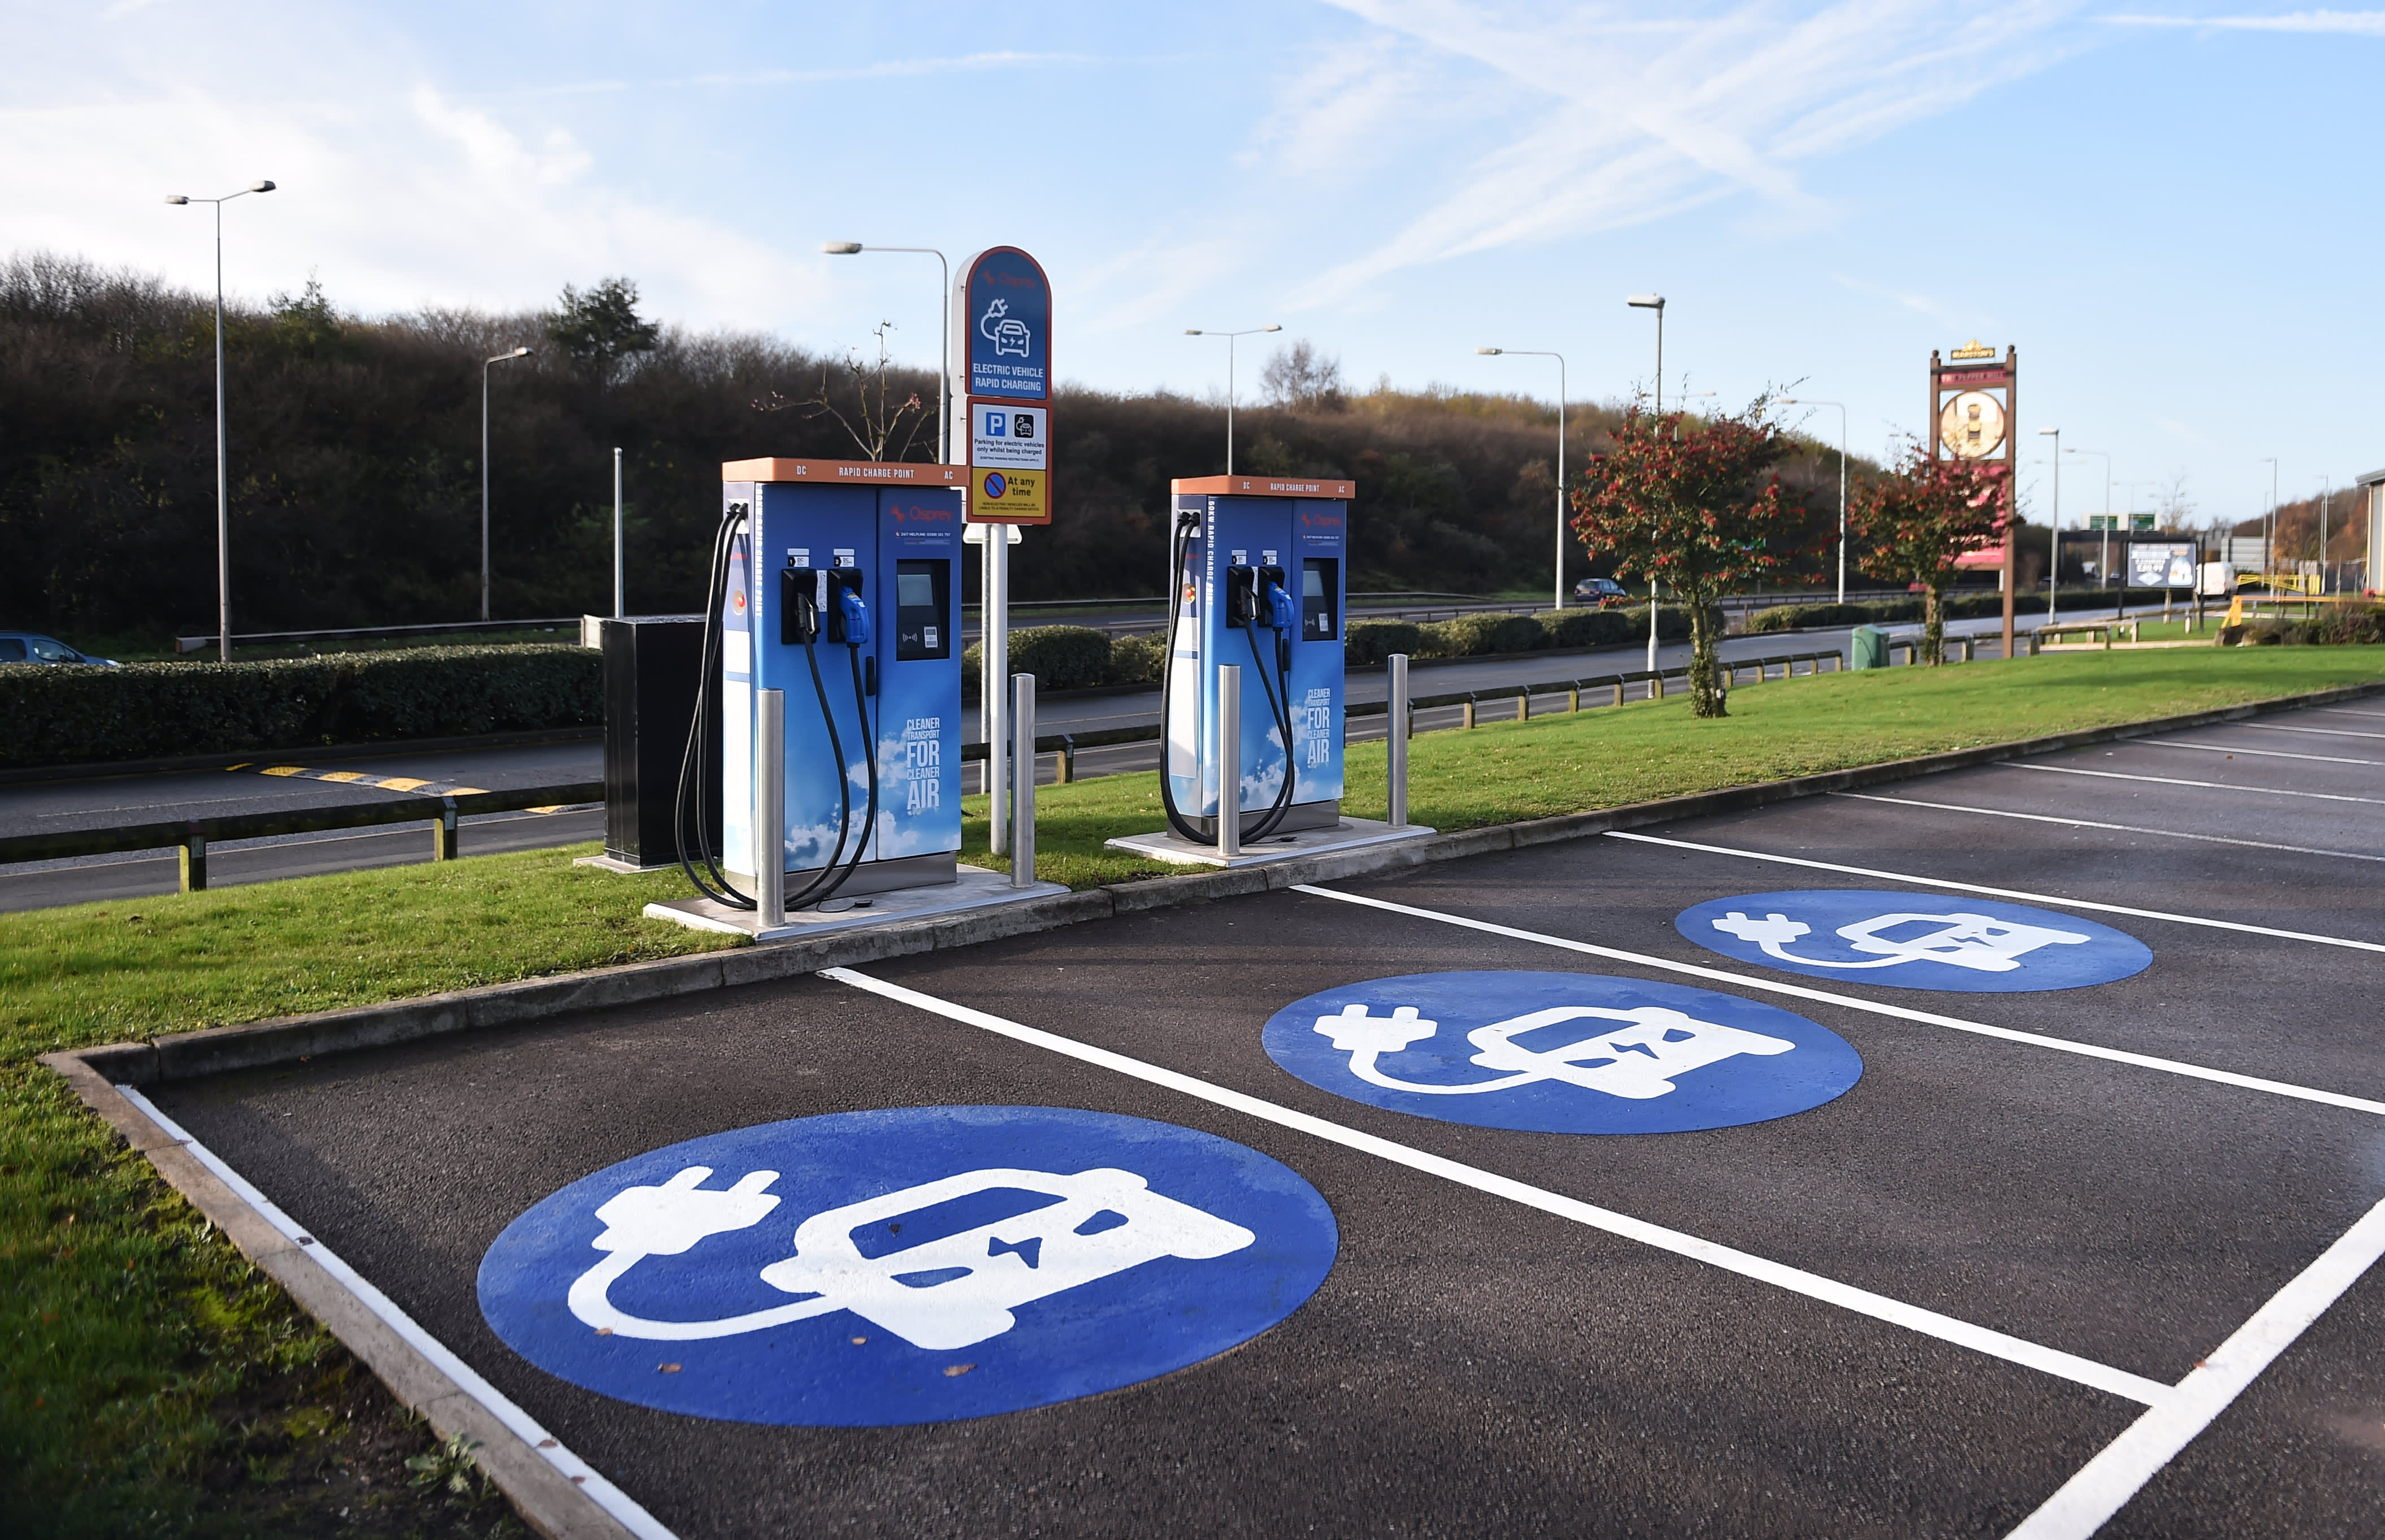 Electric vehicle charging stations will be tested to balance the